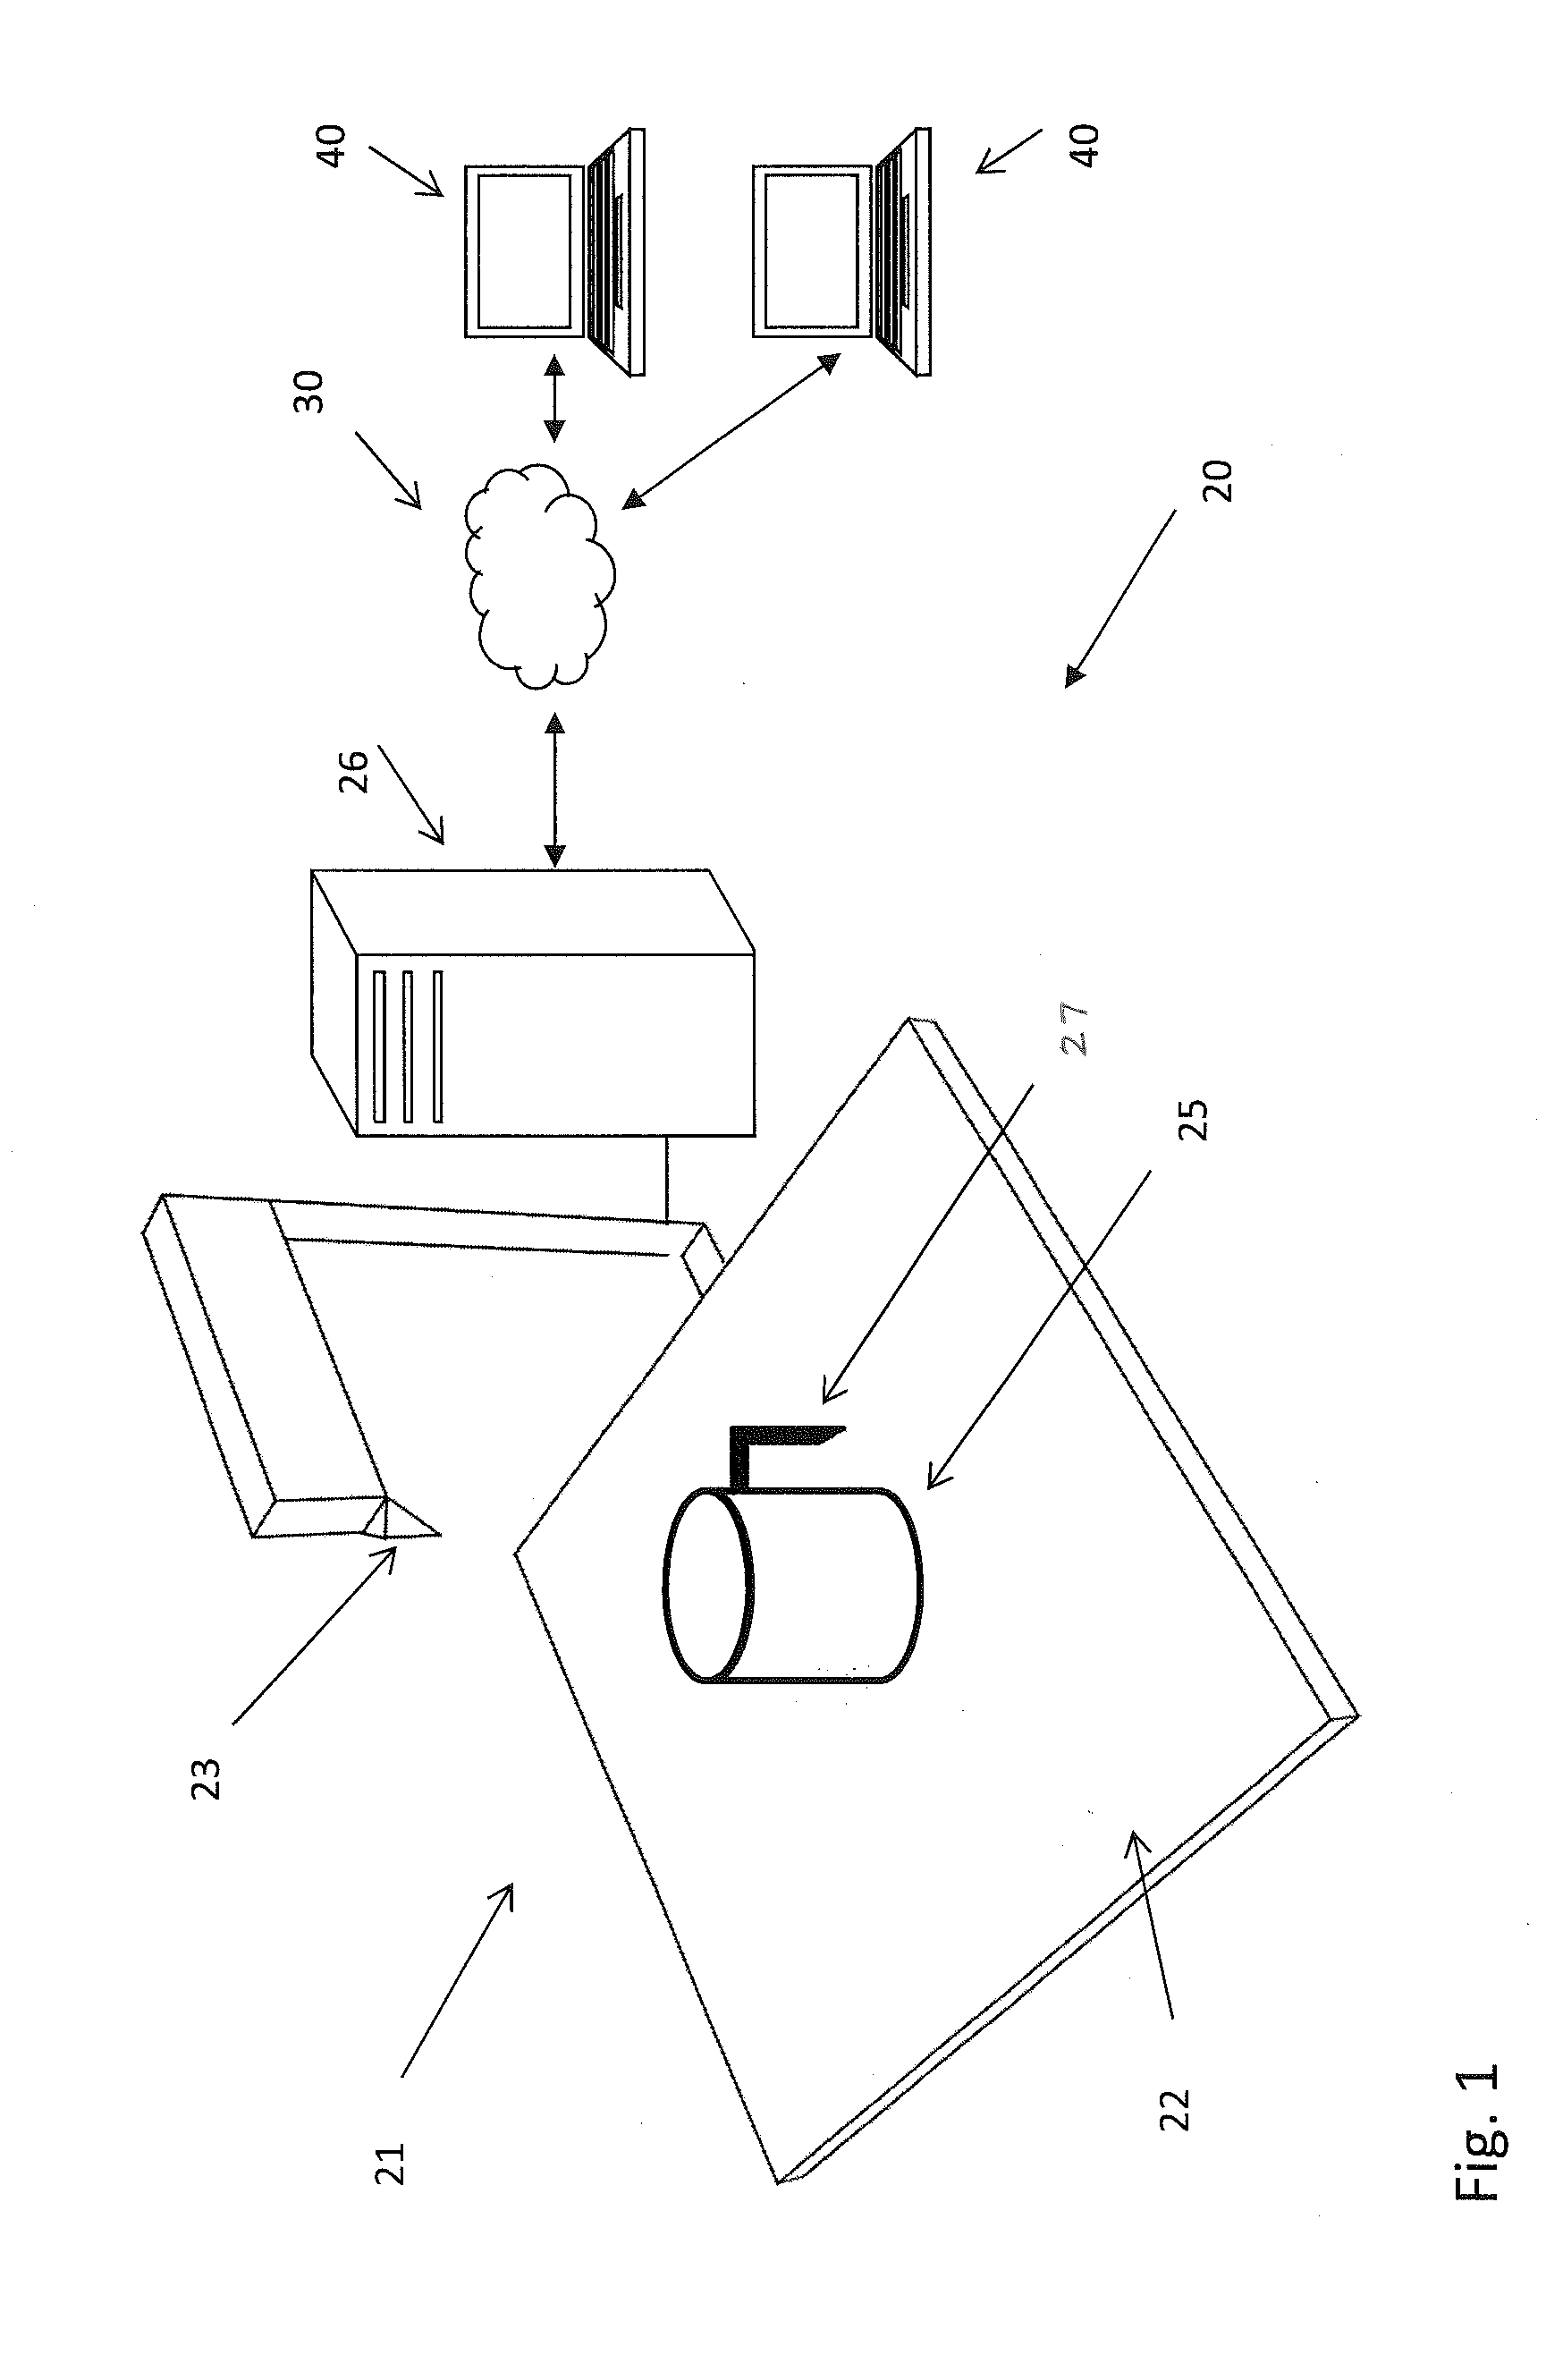 Method for visually augmenting a real object with a computer-generated image